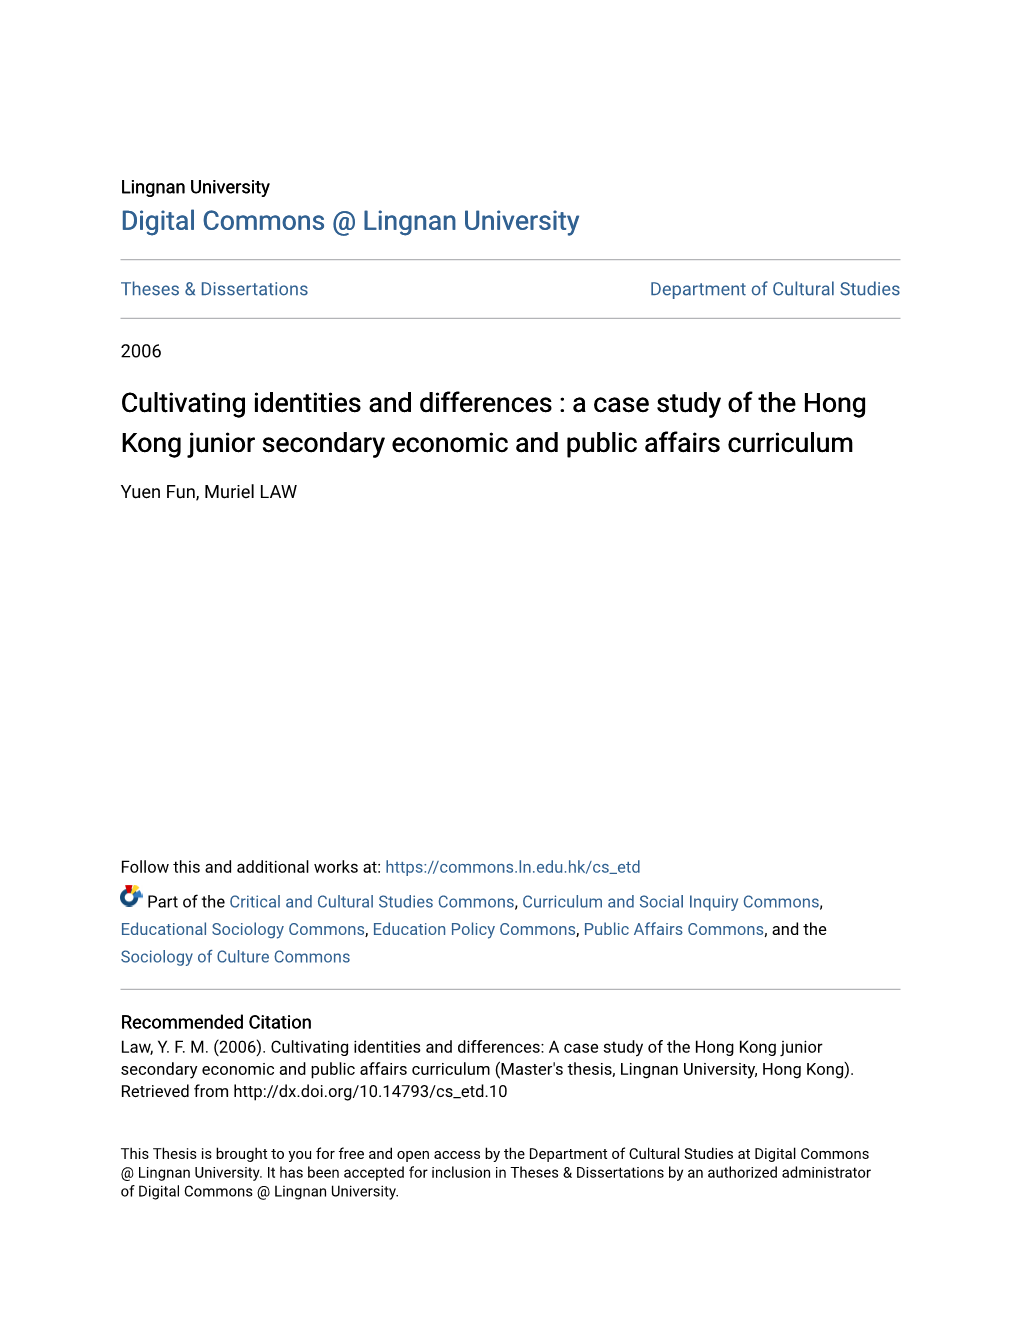 Cultivating Identities and Differences : a Case Study of the Hong Kong Junior Secondary Economic and Public Affairs Curriculum